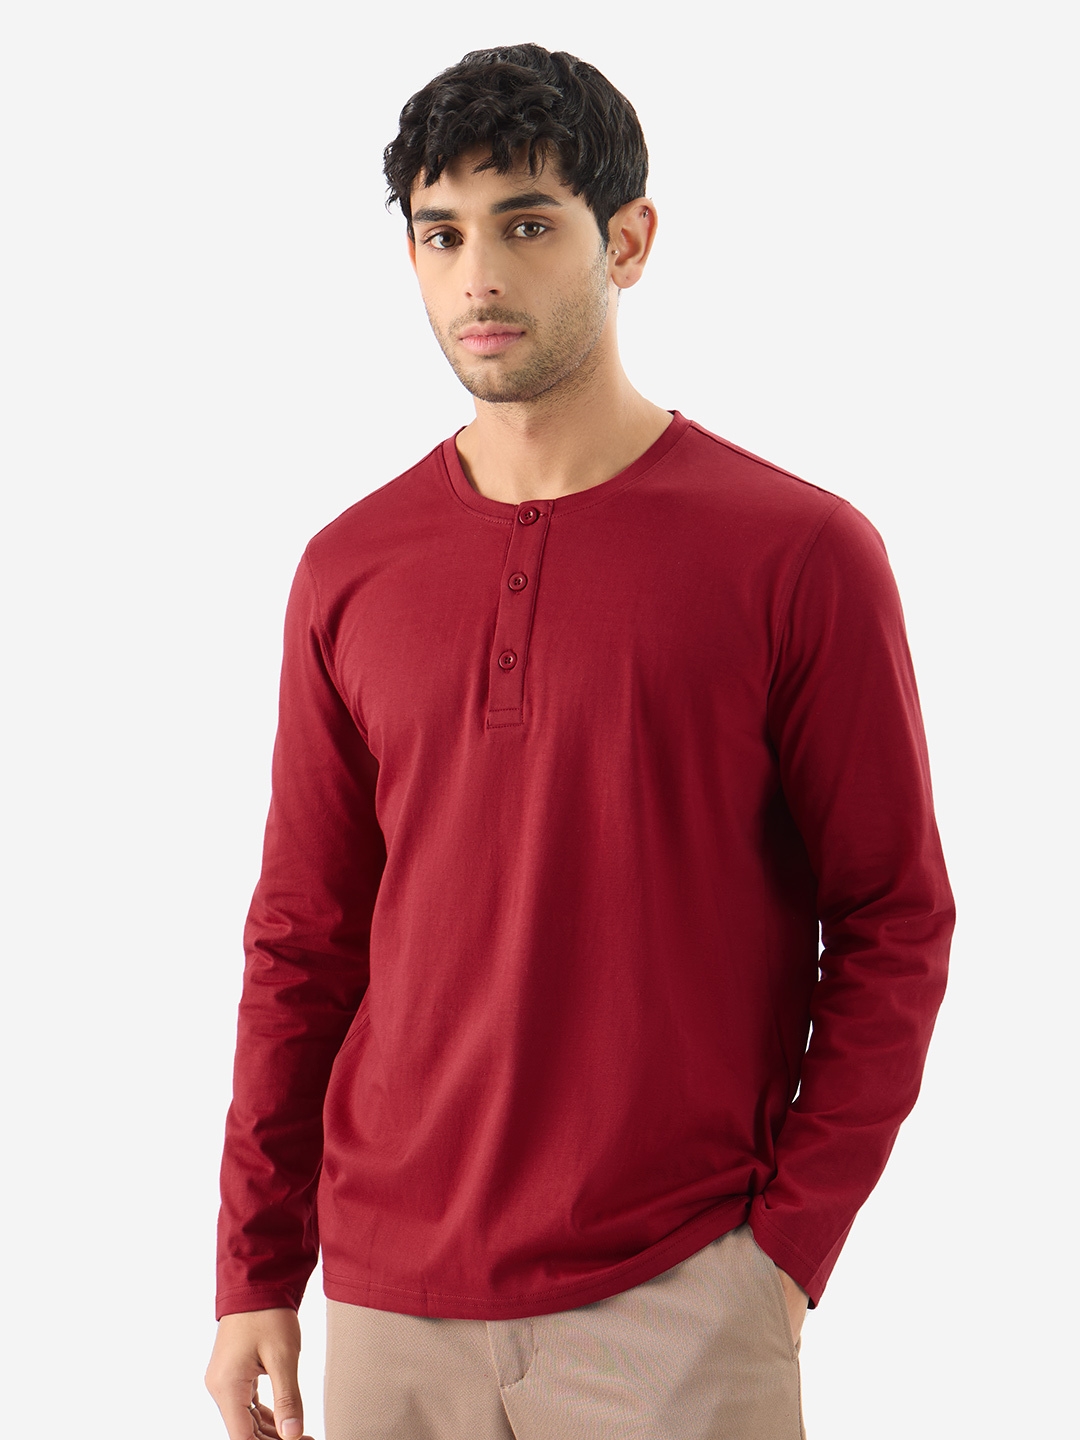 The Souled Store | Men's Solids: Superhero Red Henley T-Shirt